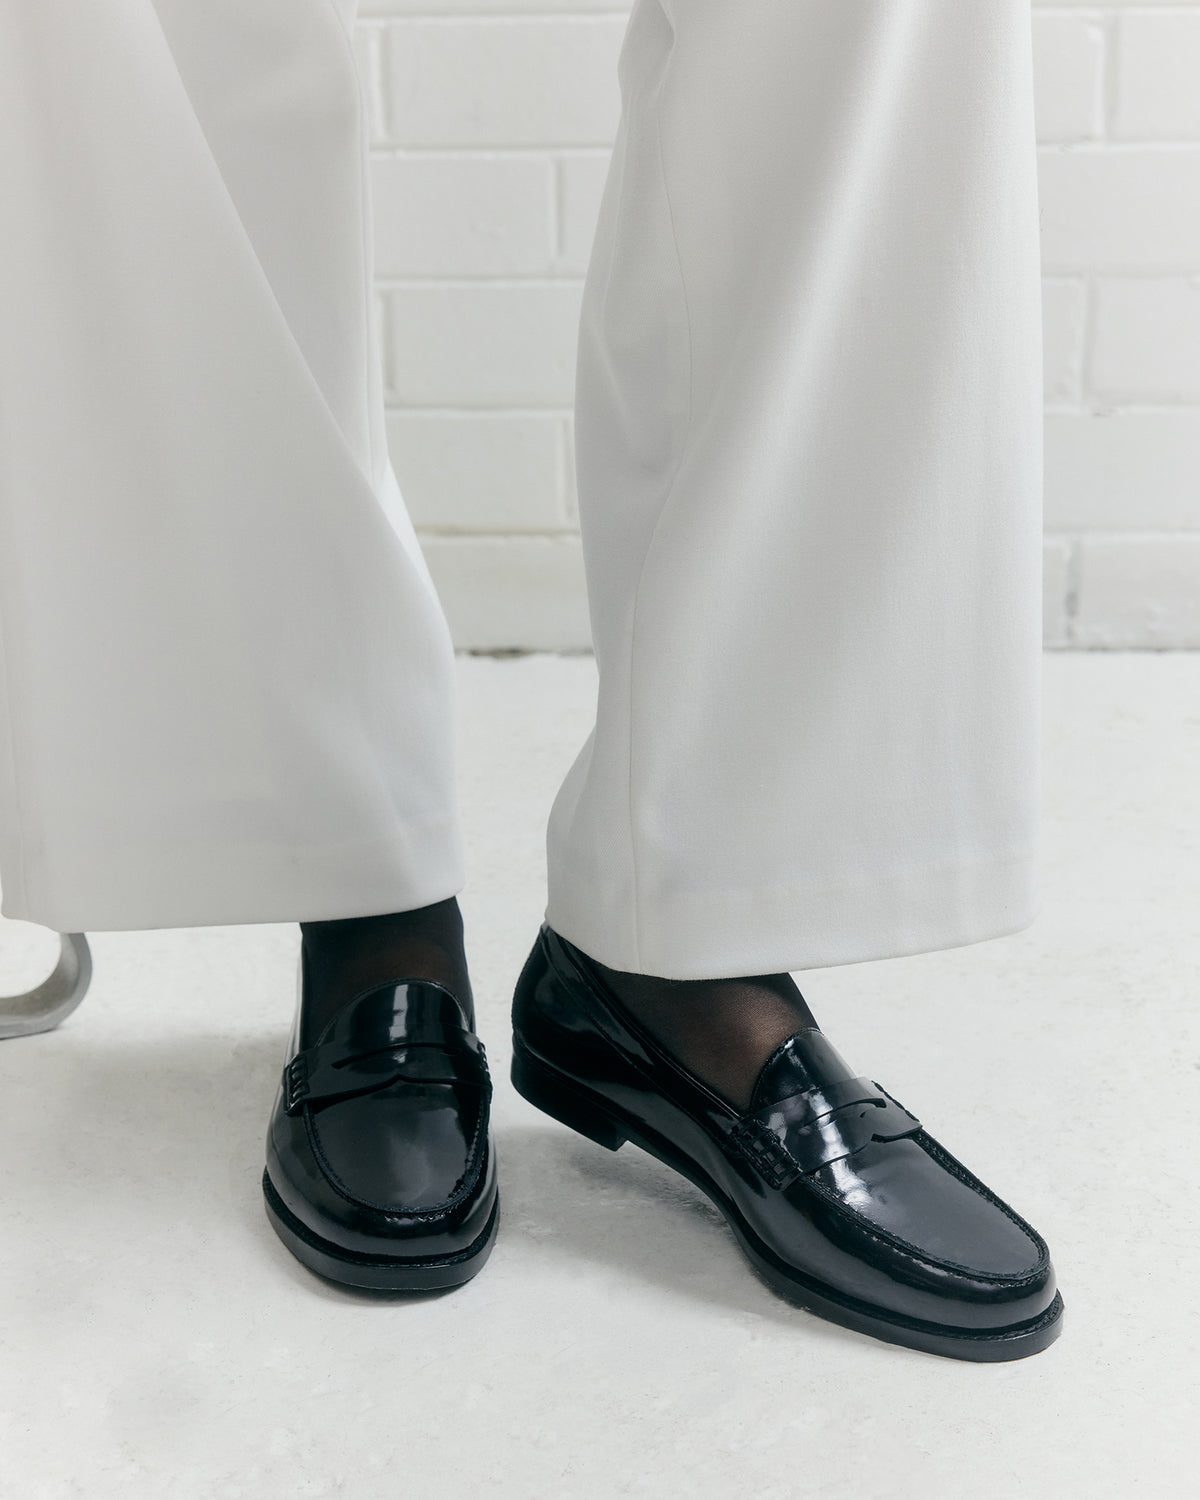 TAIT LOAFERS BLACK PATENT